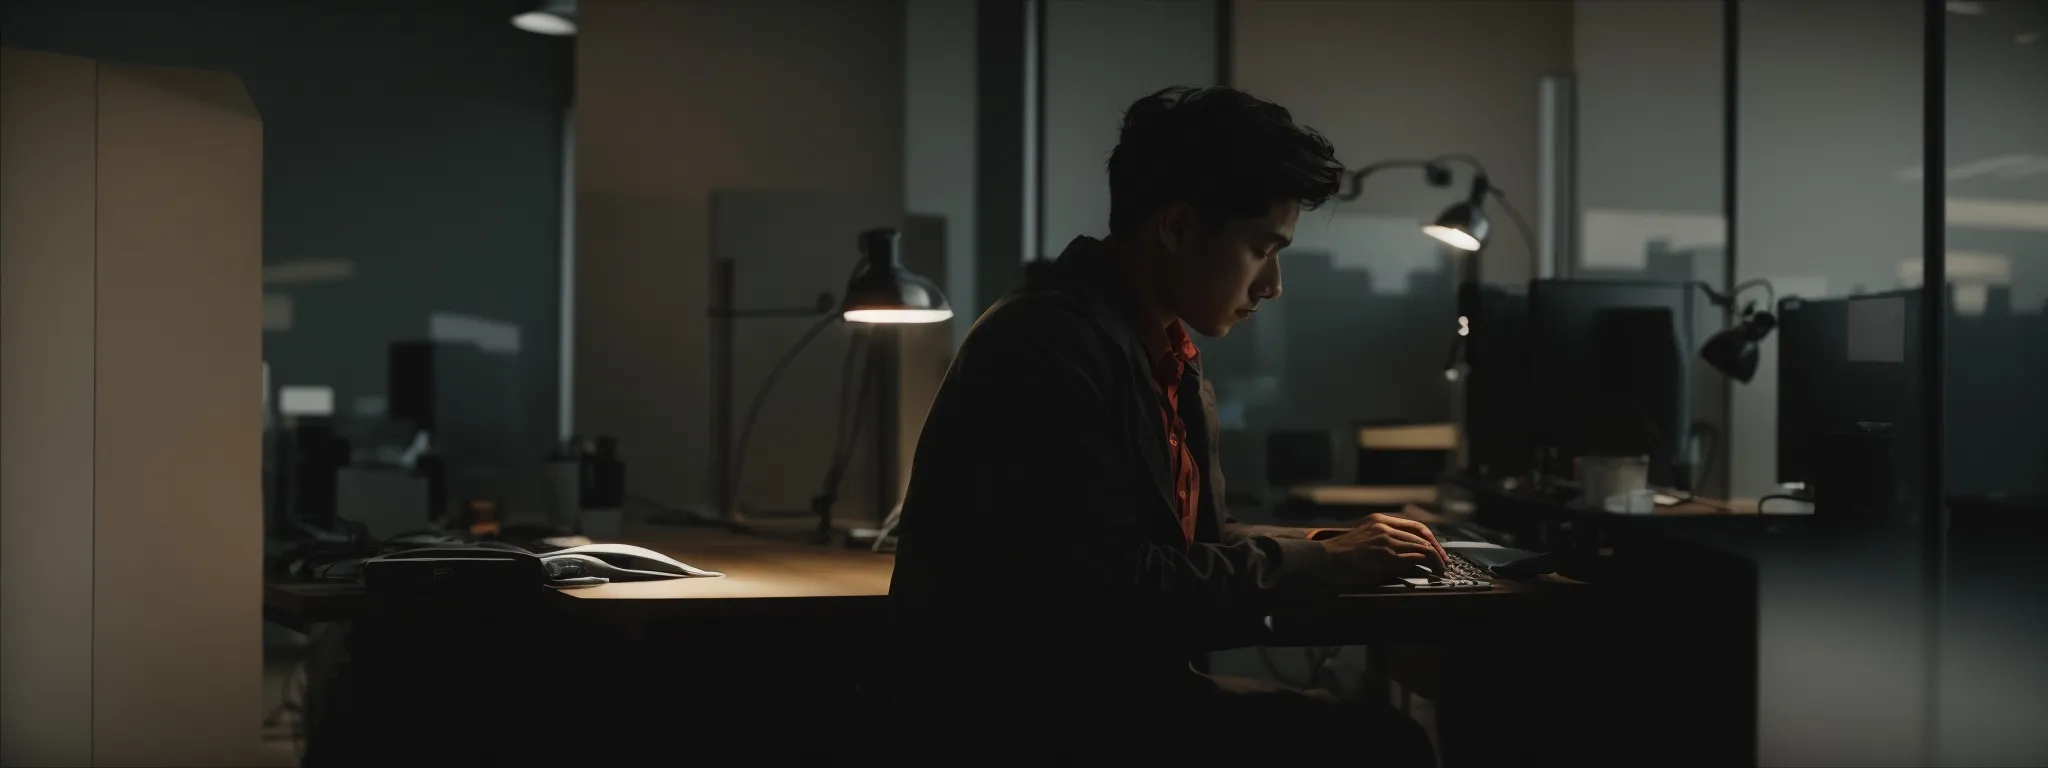 a focused individual typing on a modern computer in a well-lit office space.